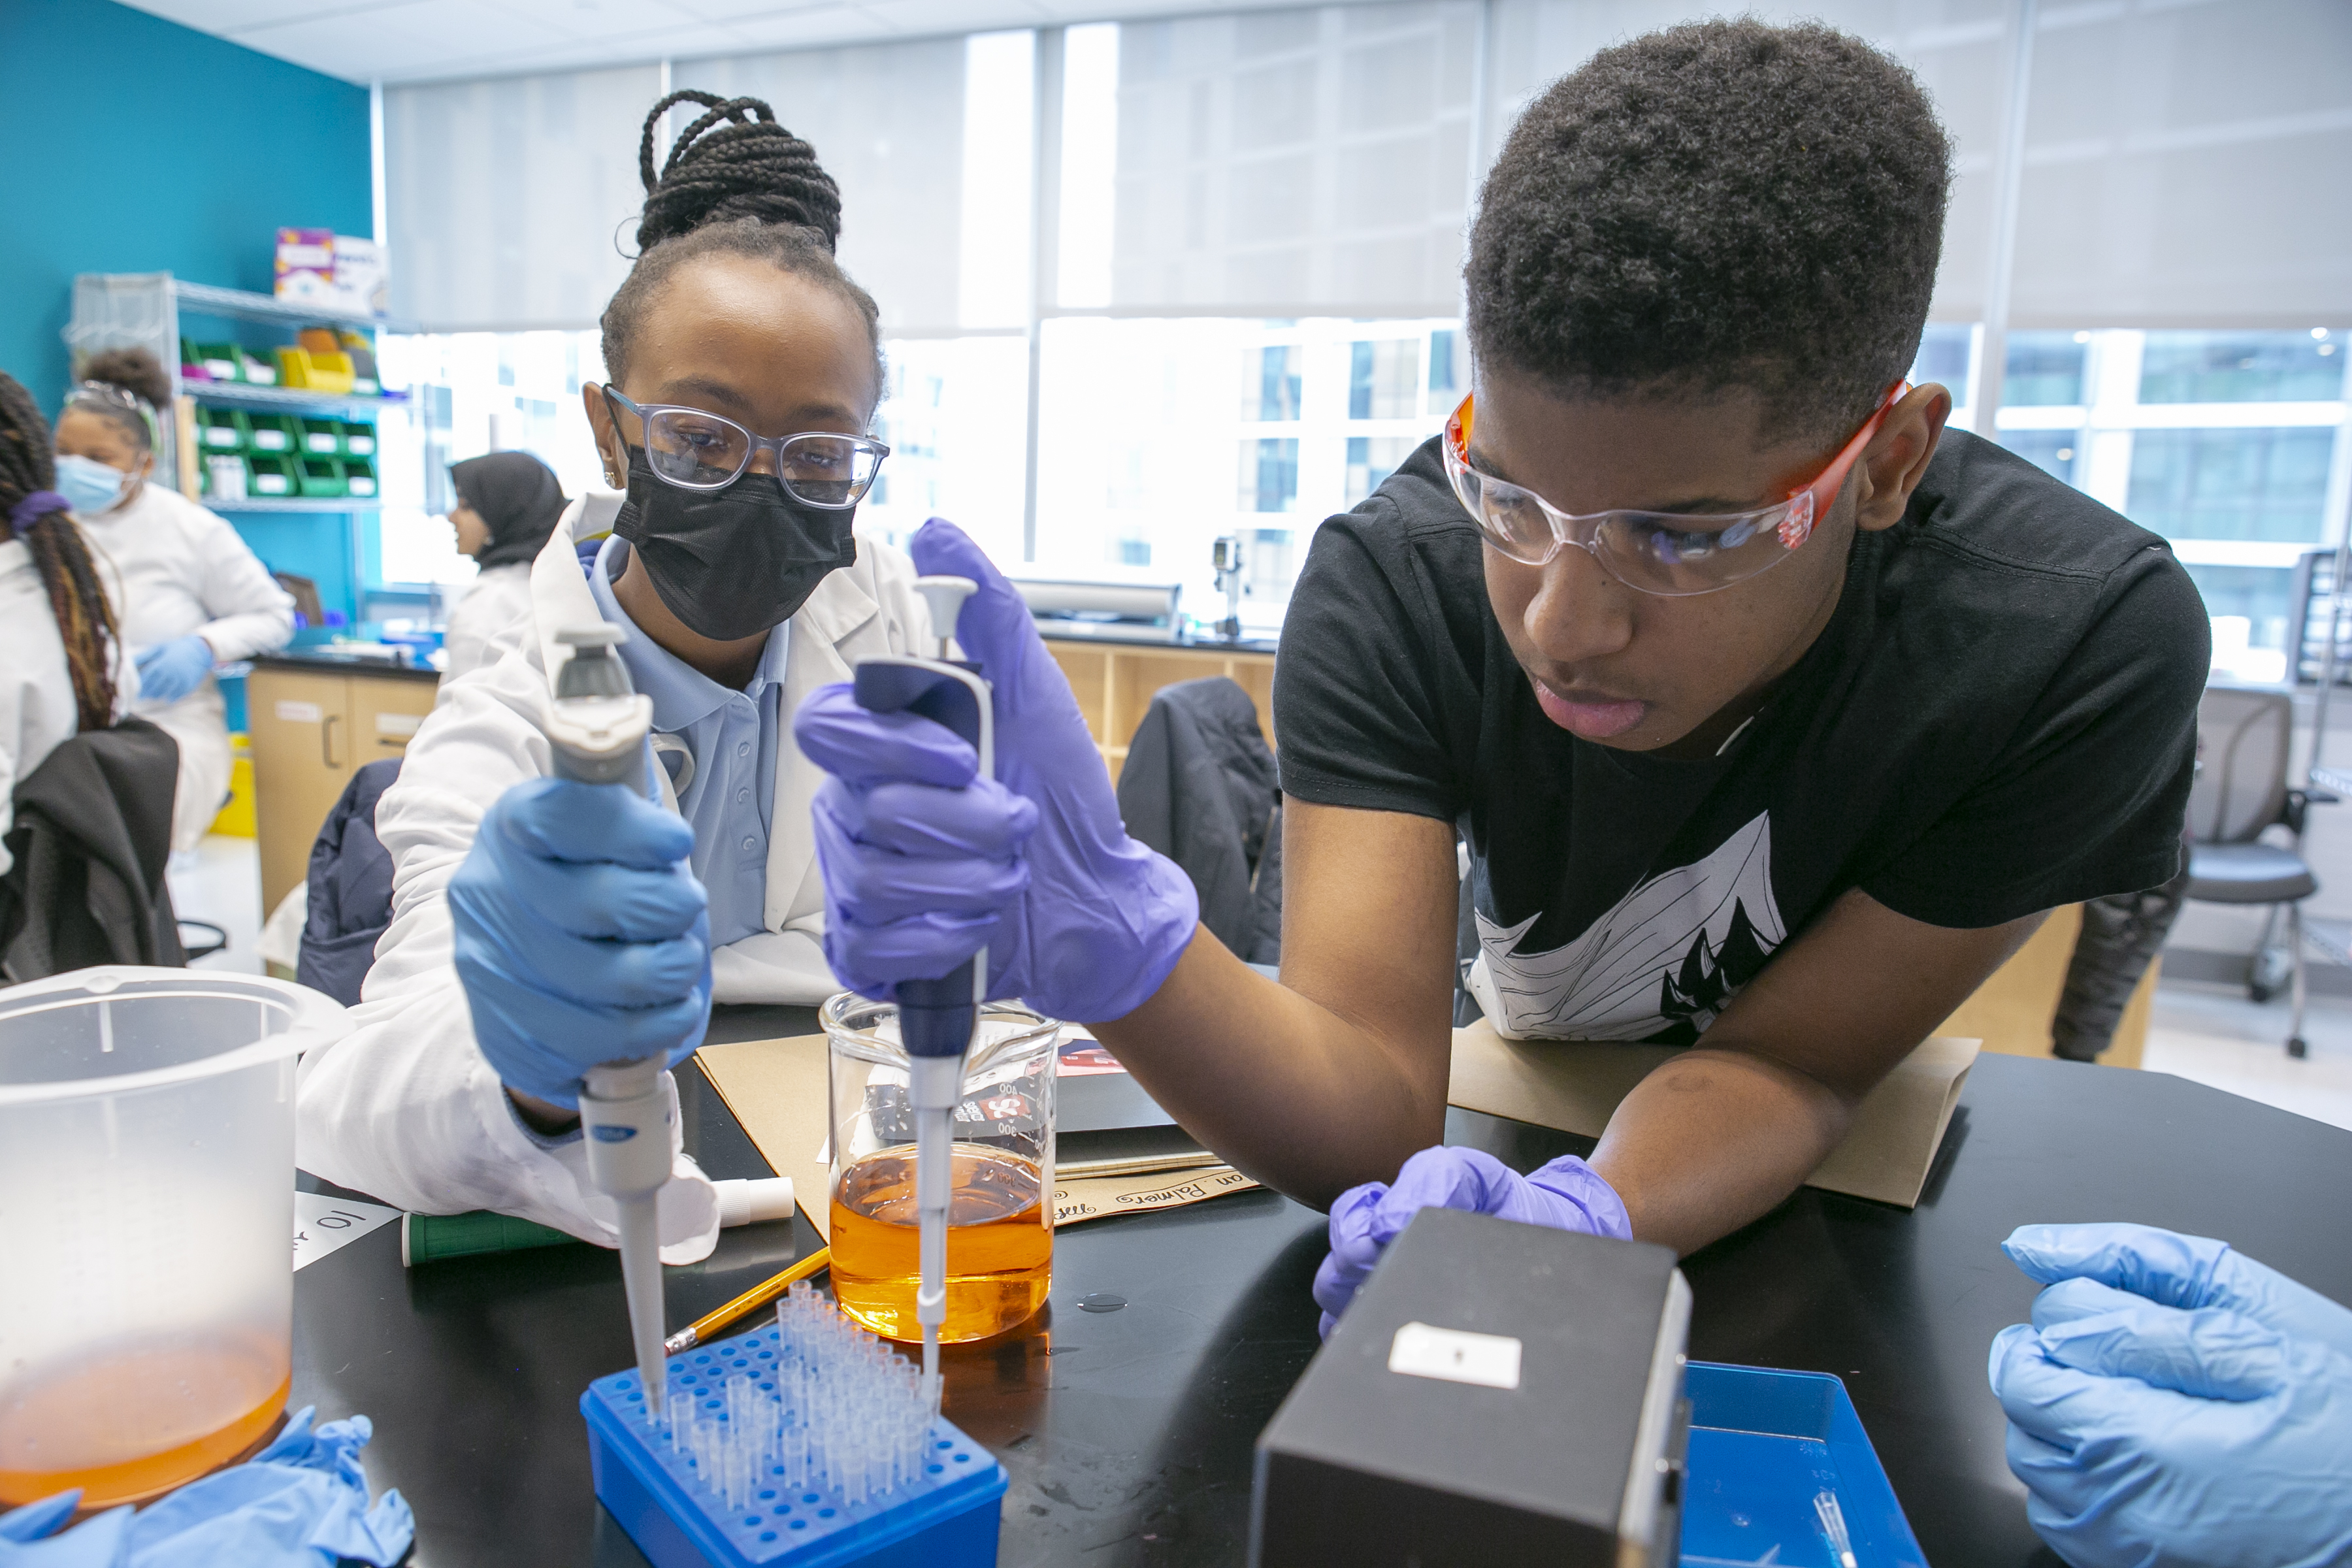 Two younger students wearing lab coats and gloves working together on a project in a lab.